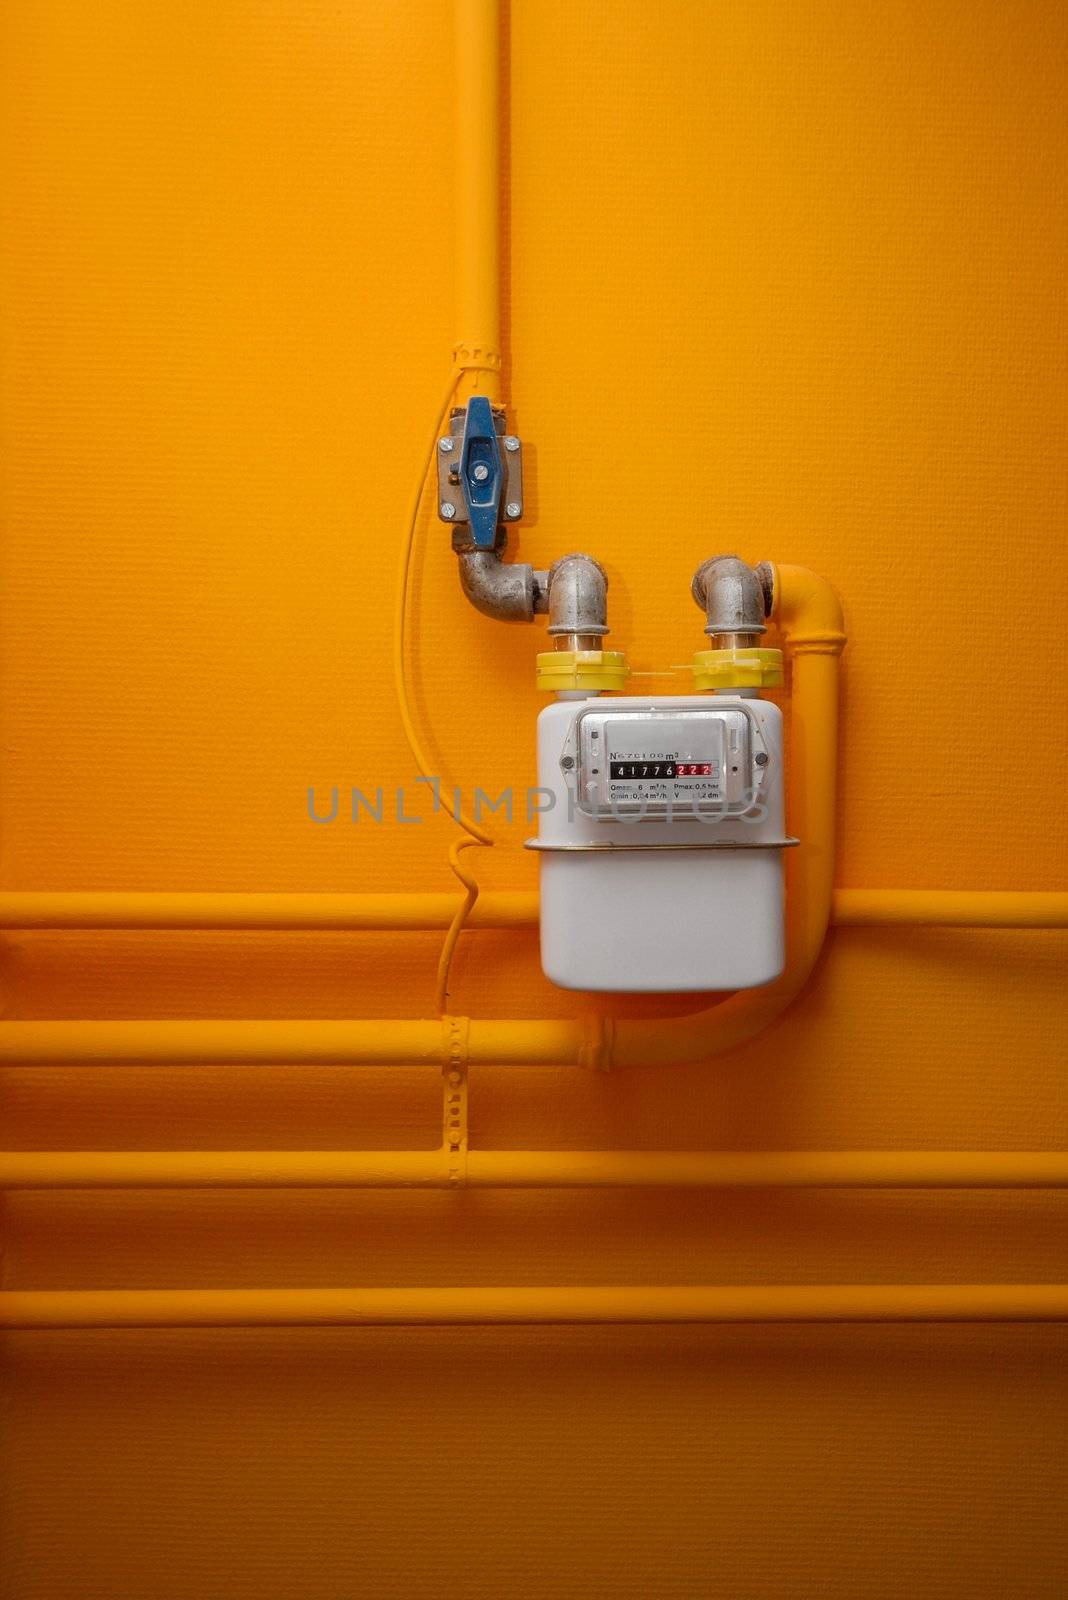 Pipes and gas meter on orange wall